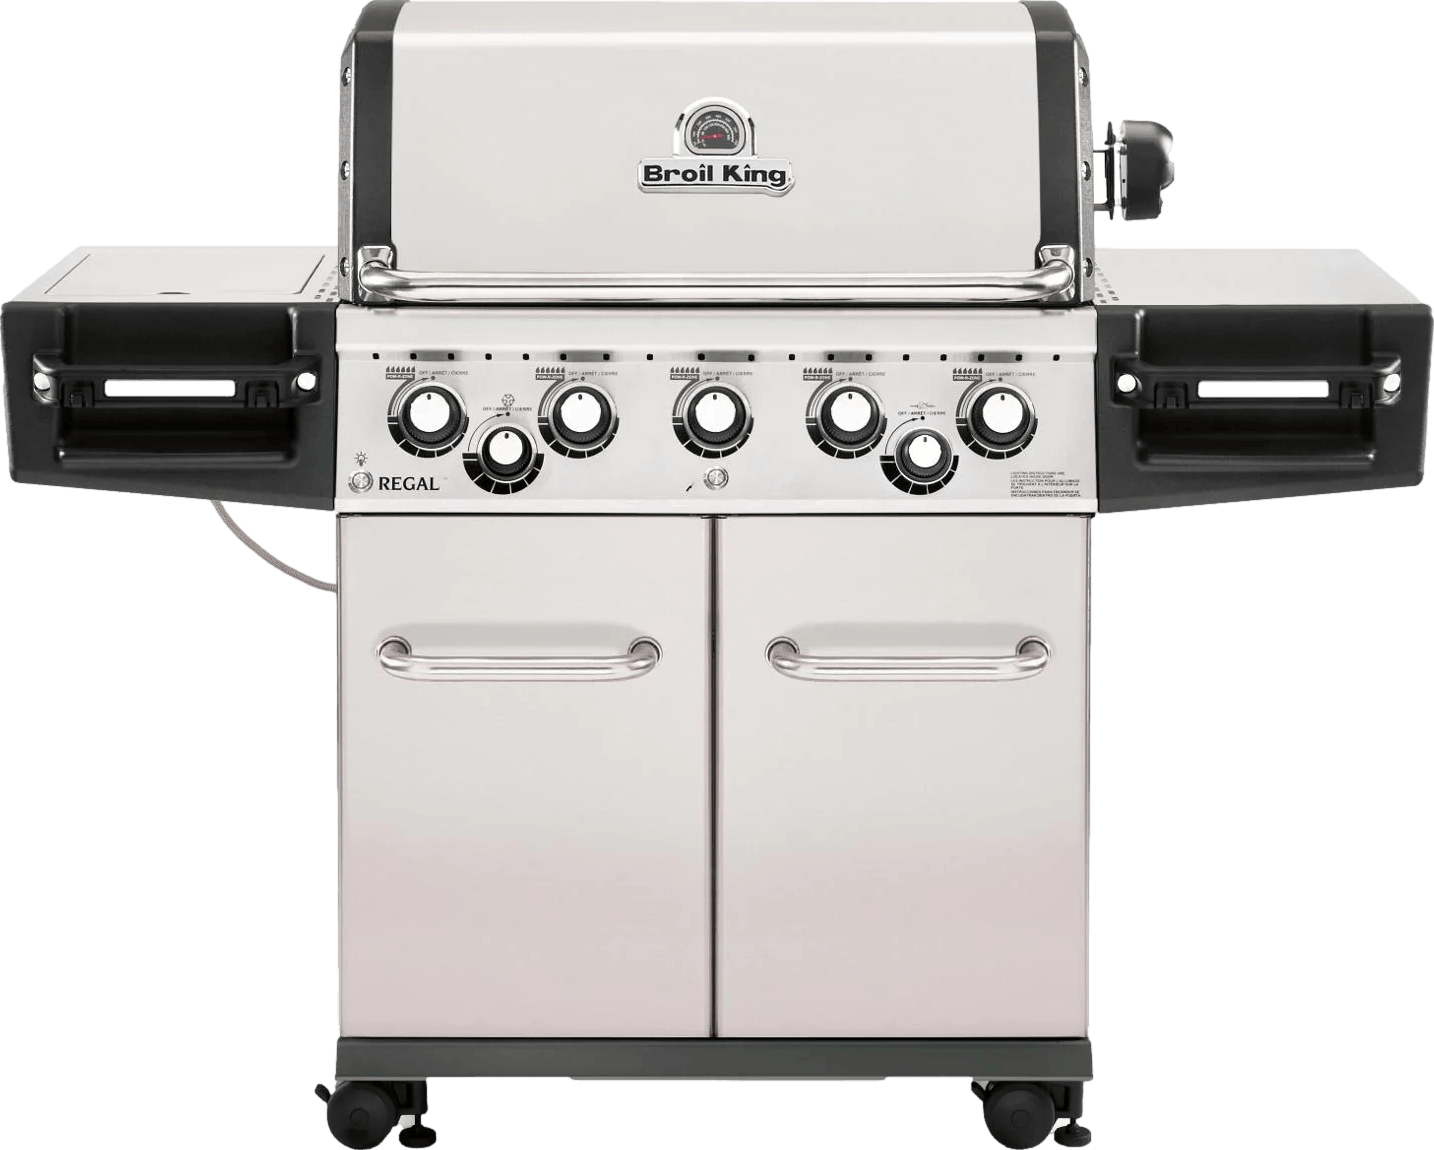 Broil King Regal Pro S590 Gas Grill